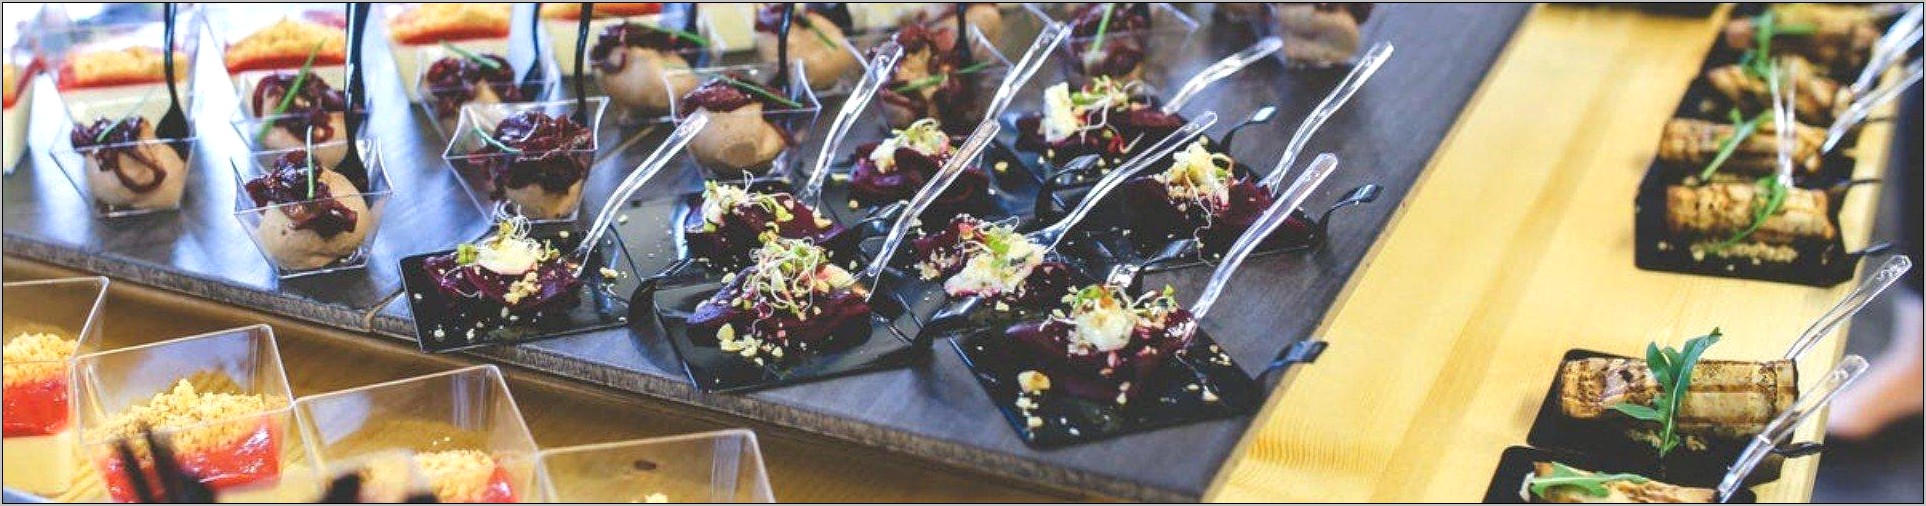 Event Sous Chef Catering Examples Resume